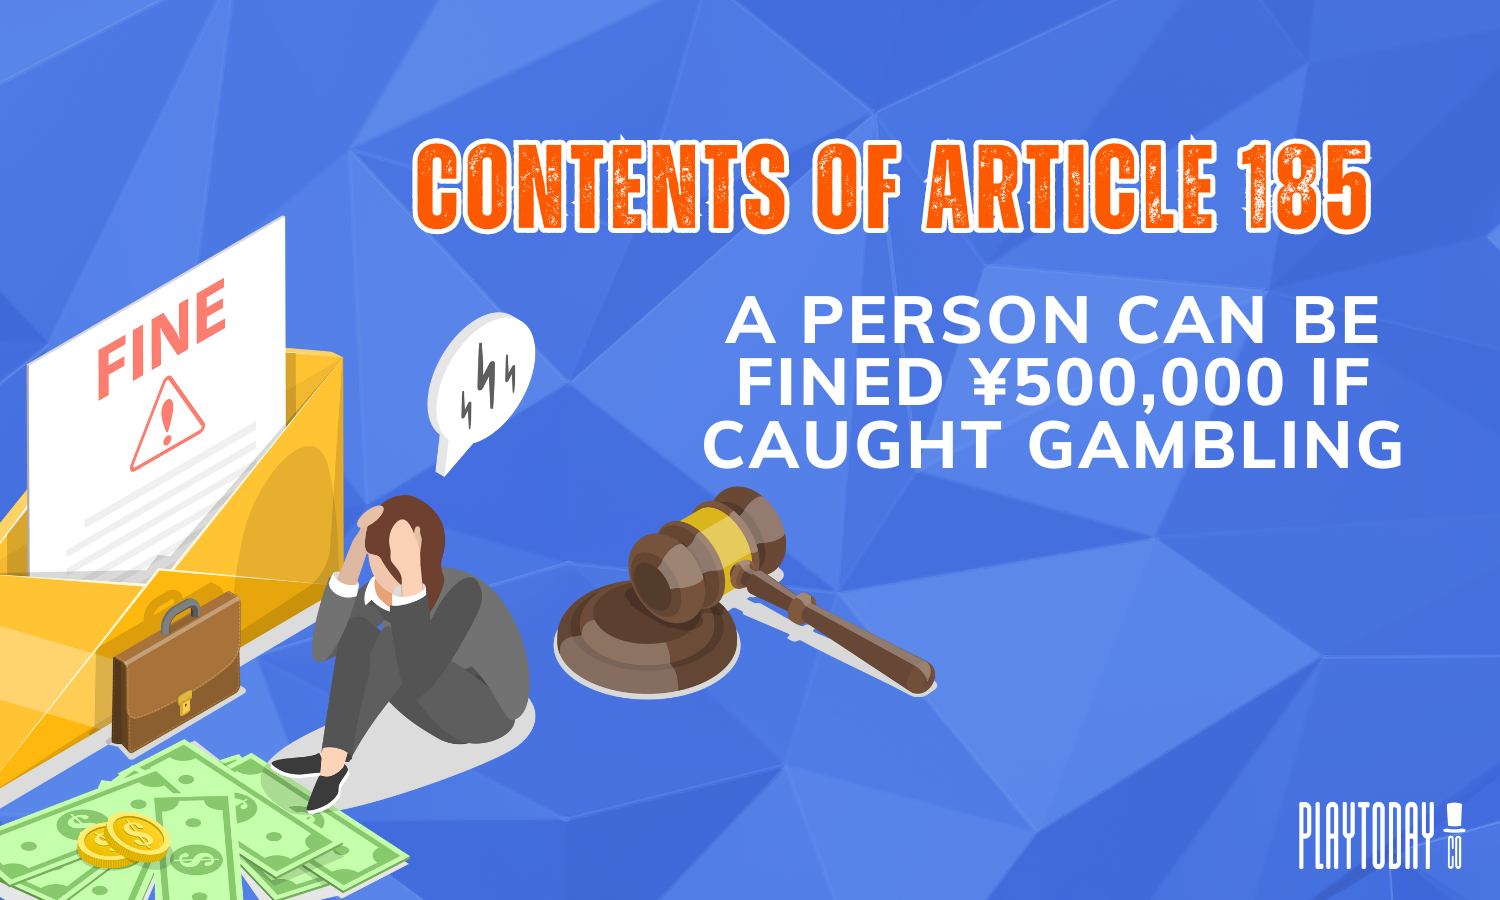 Contents of Article 185, Fines for gambling in Japan 